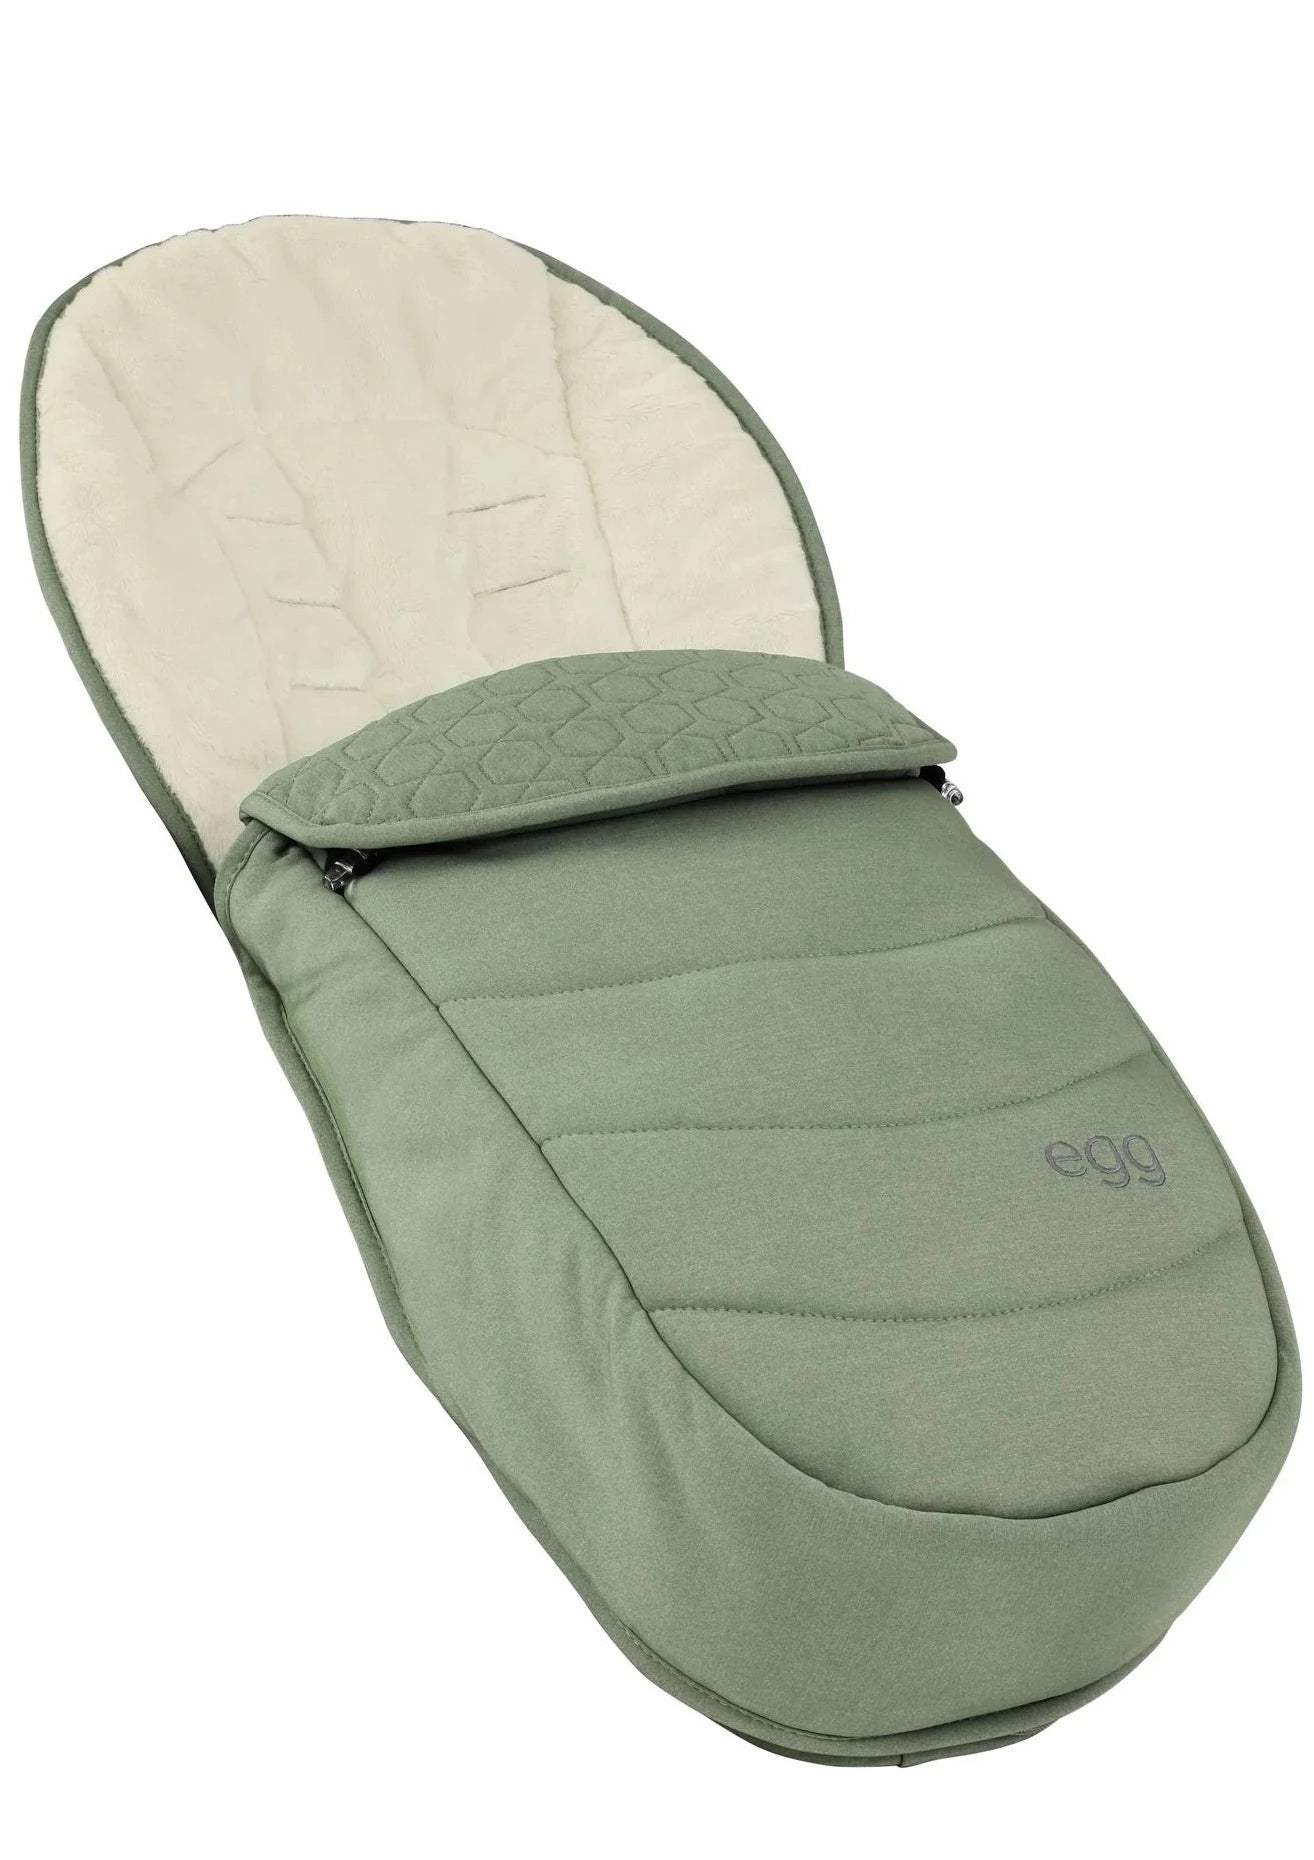 Egg 2 Seagrass Travel System